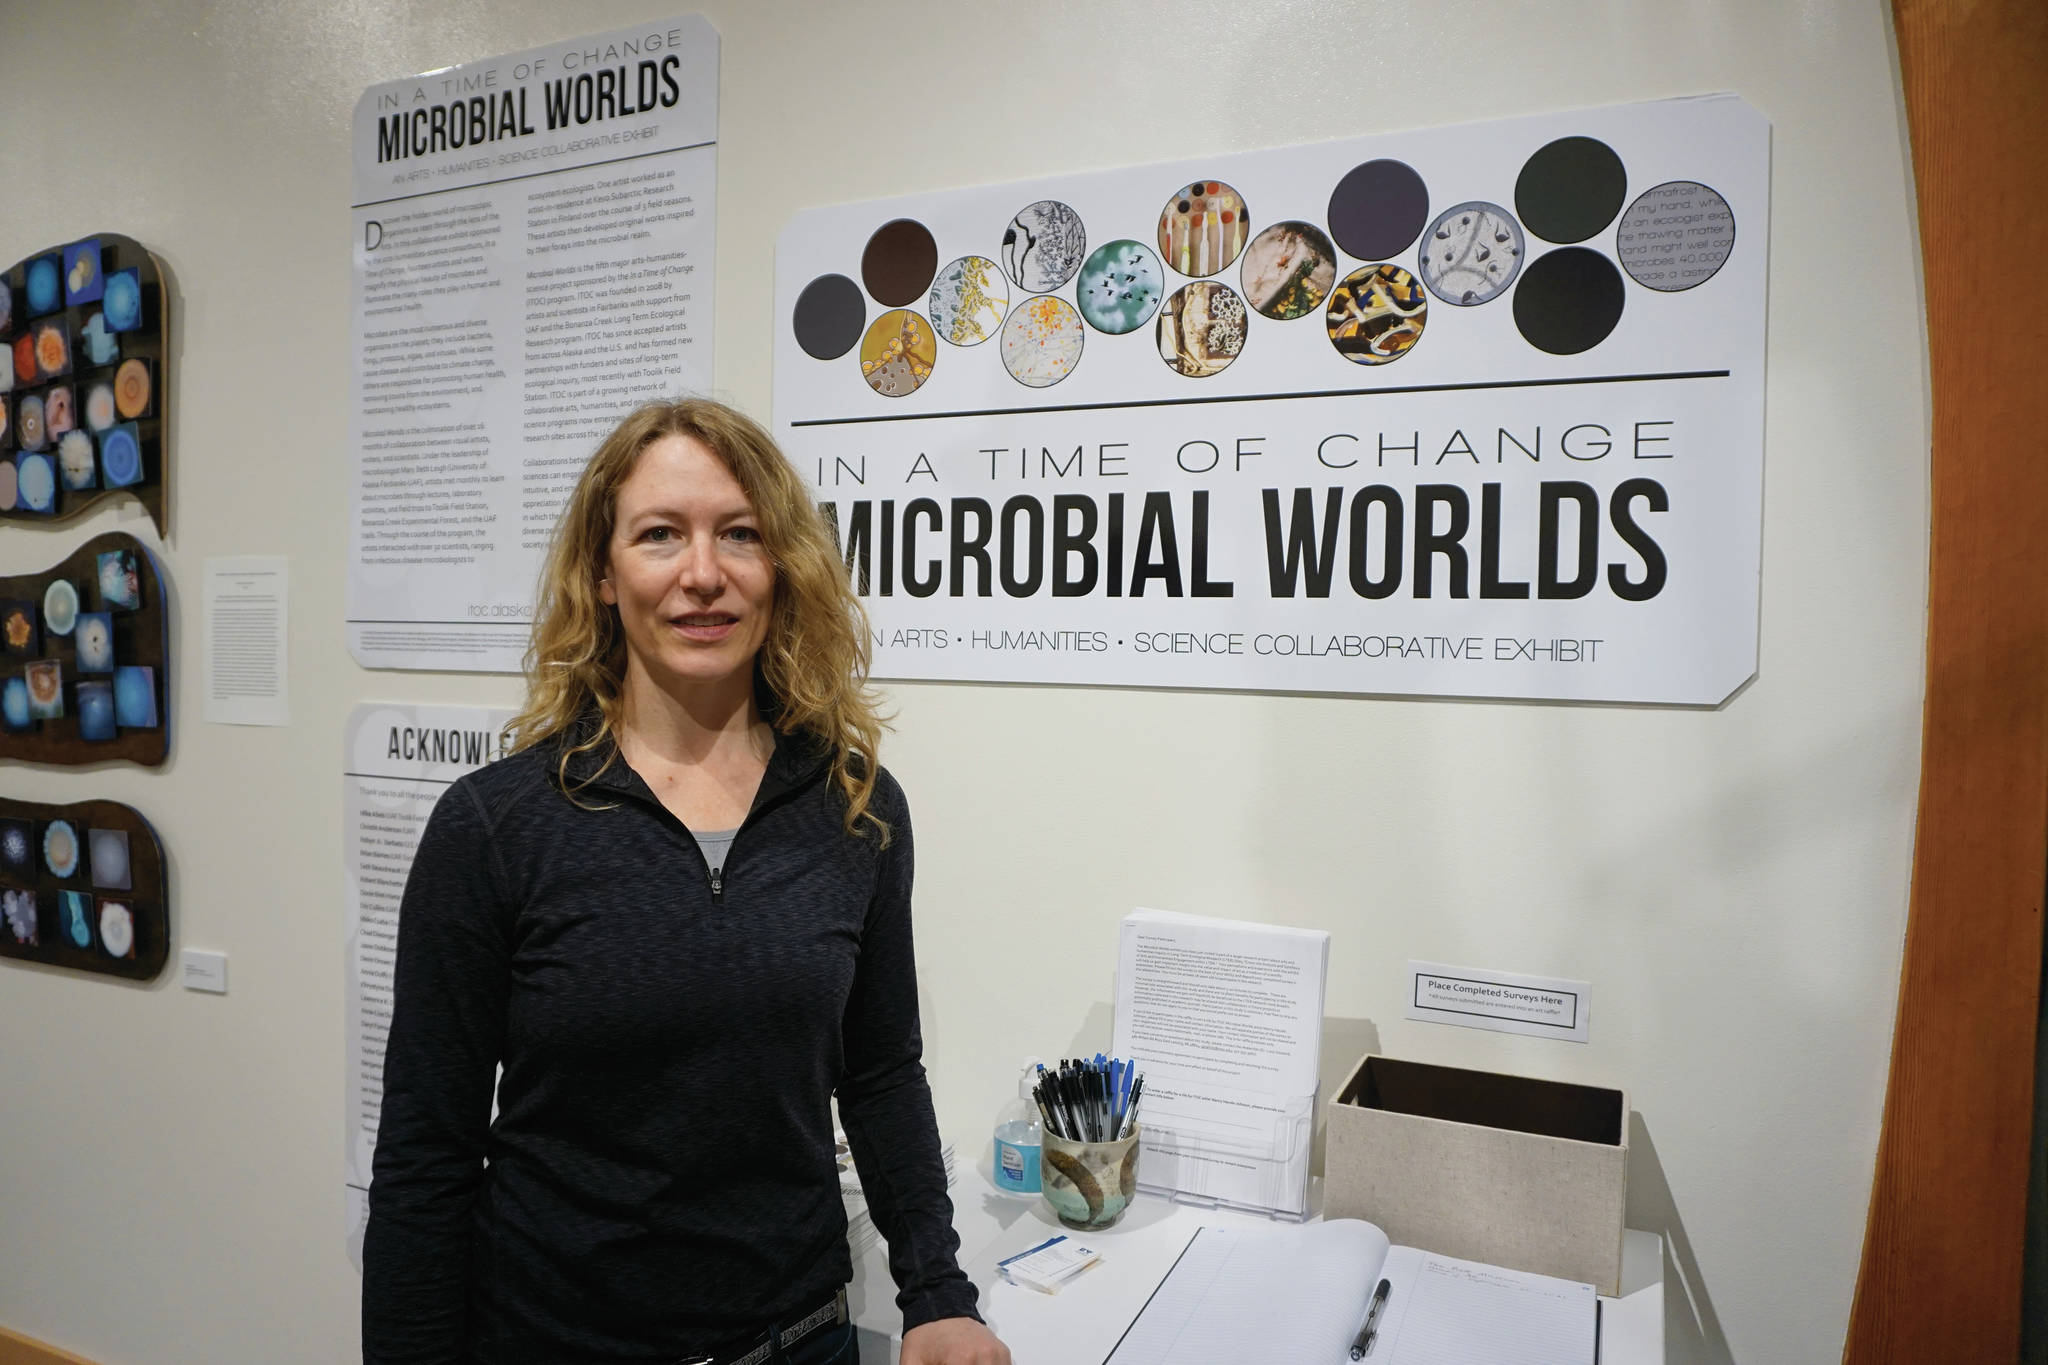 Photos by Michael Armstrong / Homer News
Mary Beth Leigh, director of the Microbial Worlds project, stands next to the exhibit on June 4 at the Pratt Museum & Park in Homer. The exhibit shows through the summer of 2021. Left, “Emergence,” by Nancy Hausle-Johnson.